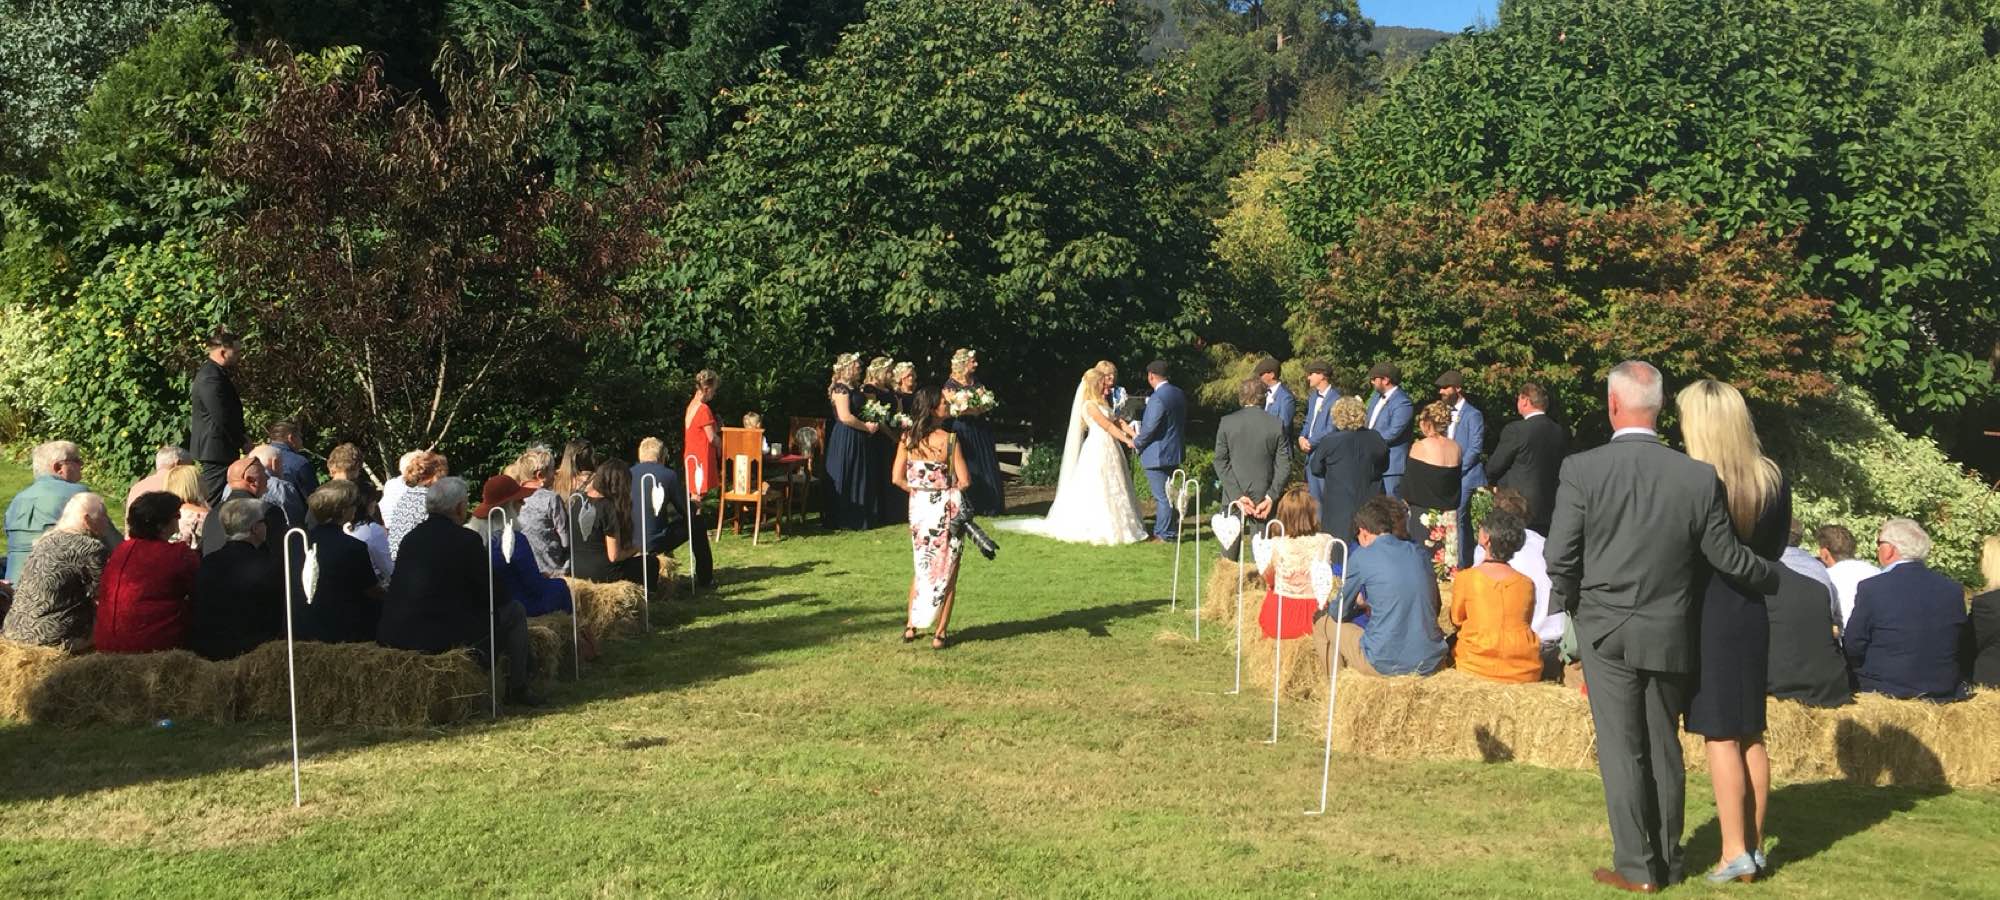 The bride and groom say I do in  Crawleighwood Garden on a beautiful sunny day